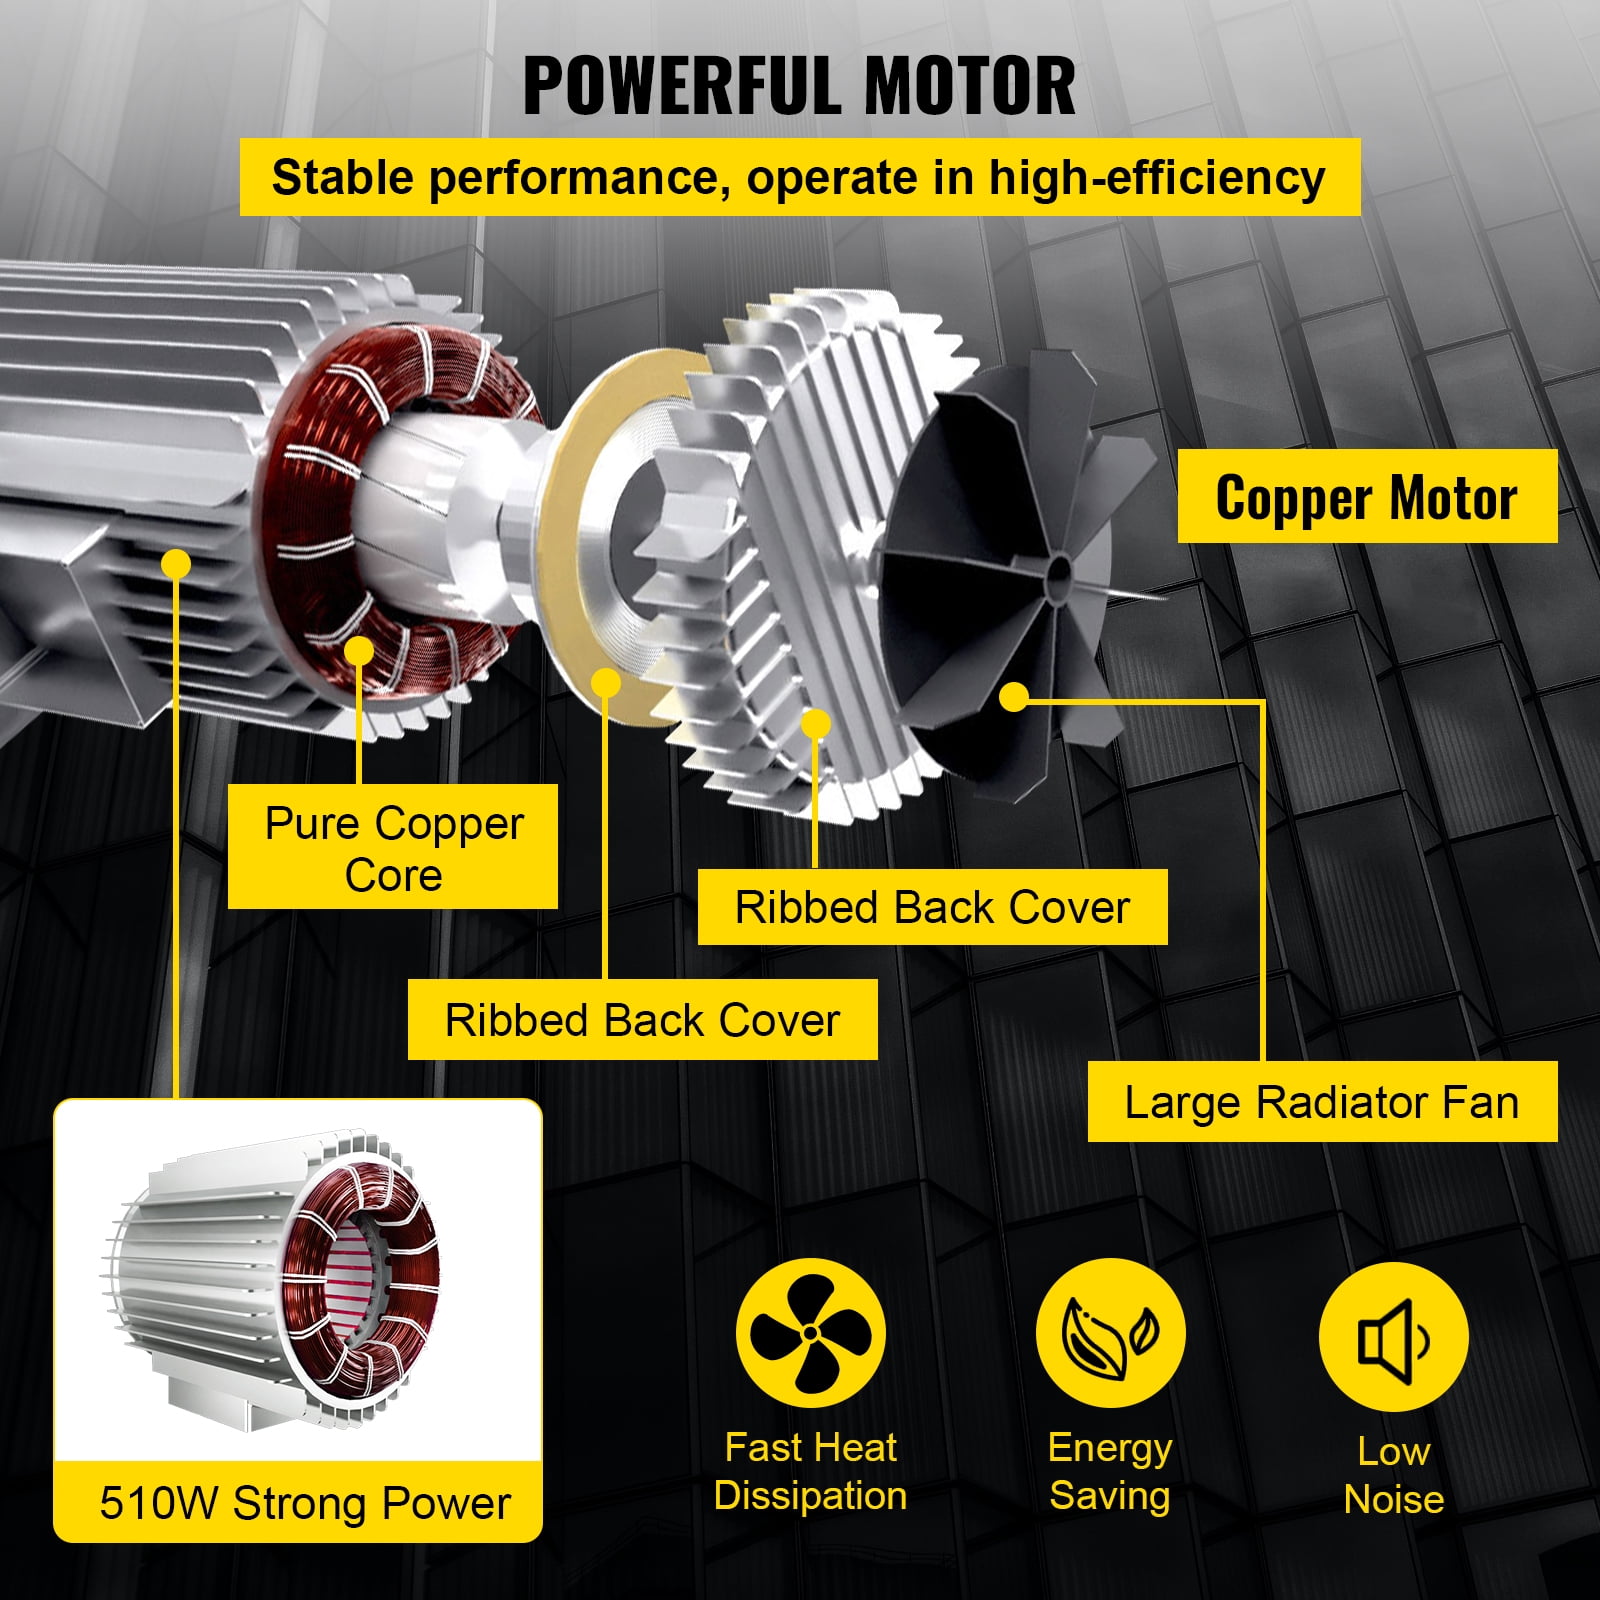 PDF) Three-phase slip-ring induction motor: Effects of rotor asymmetry